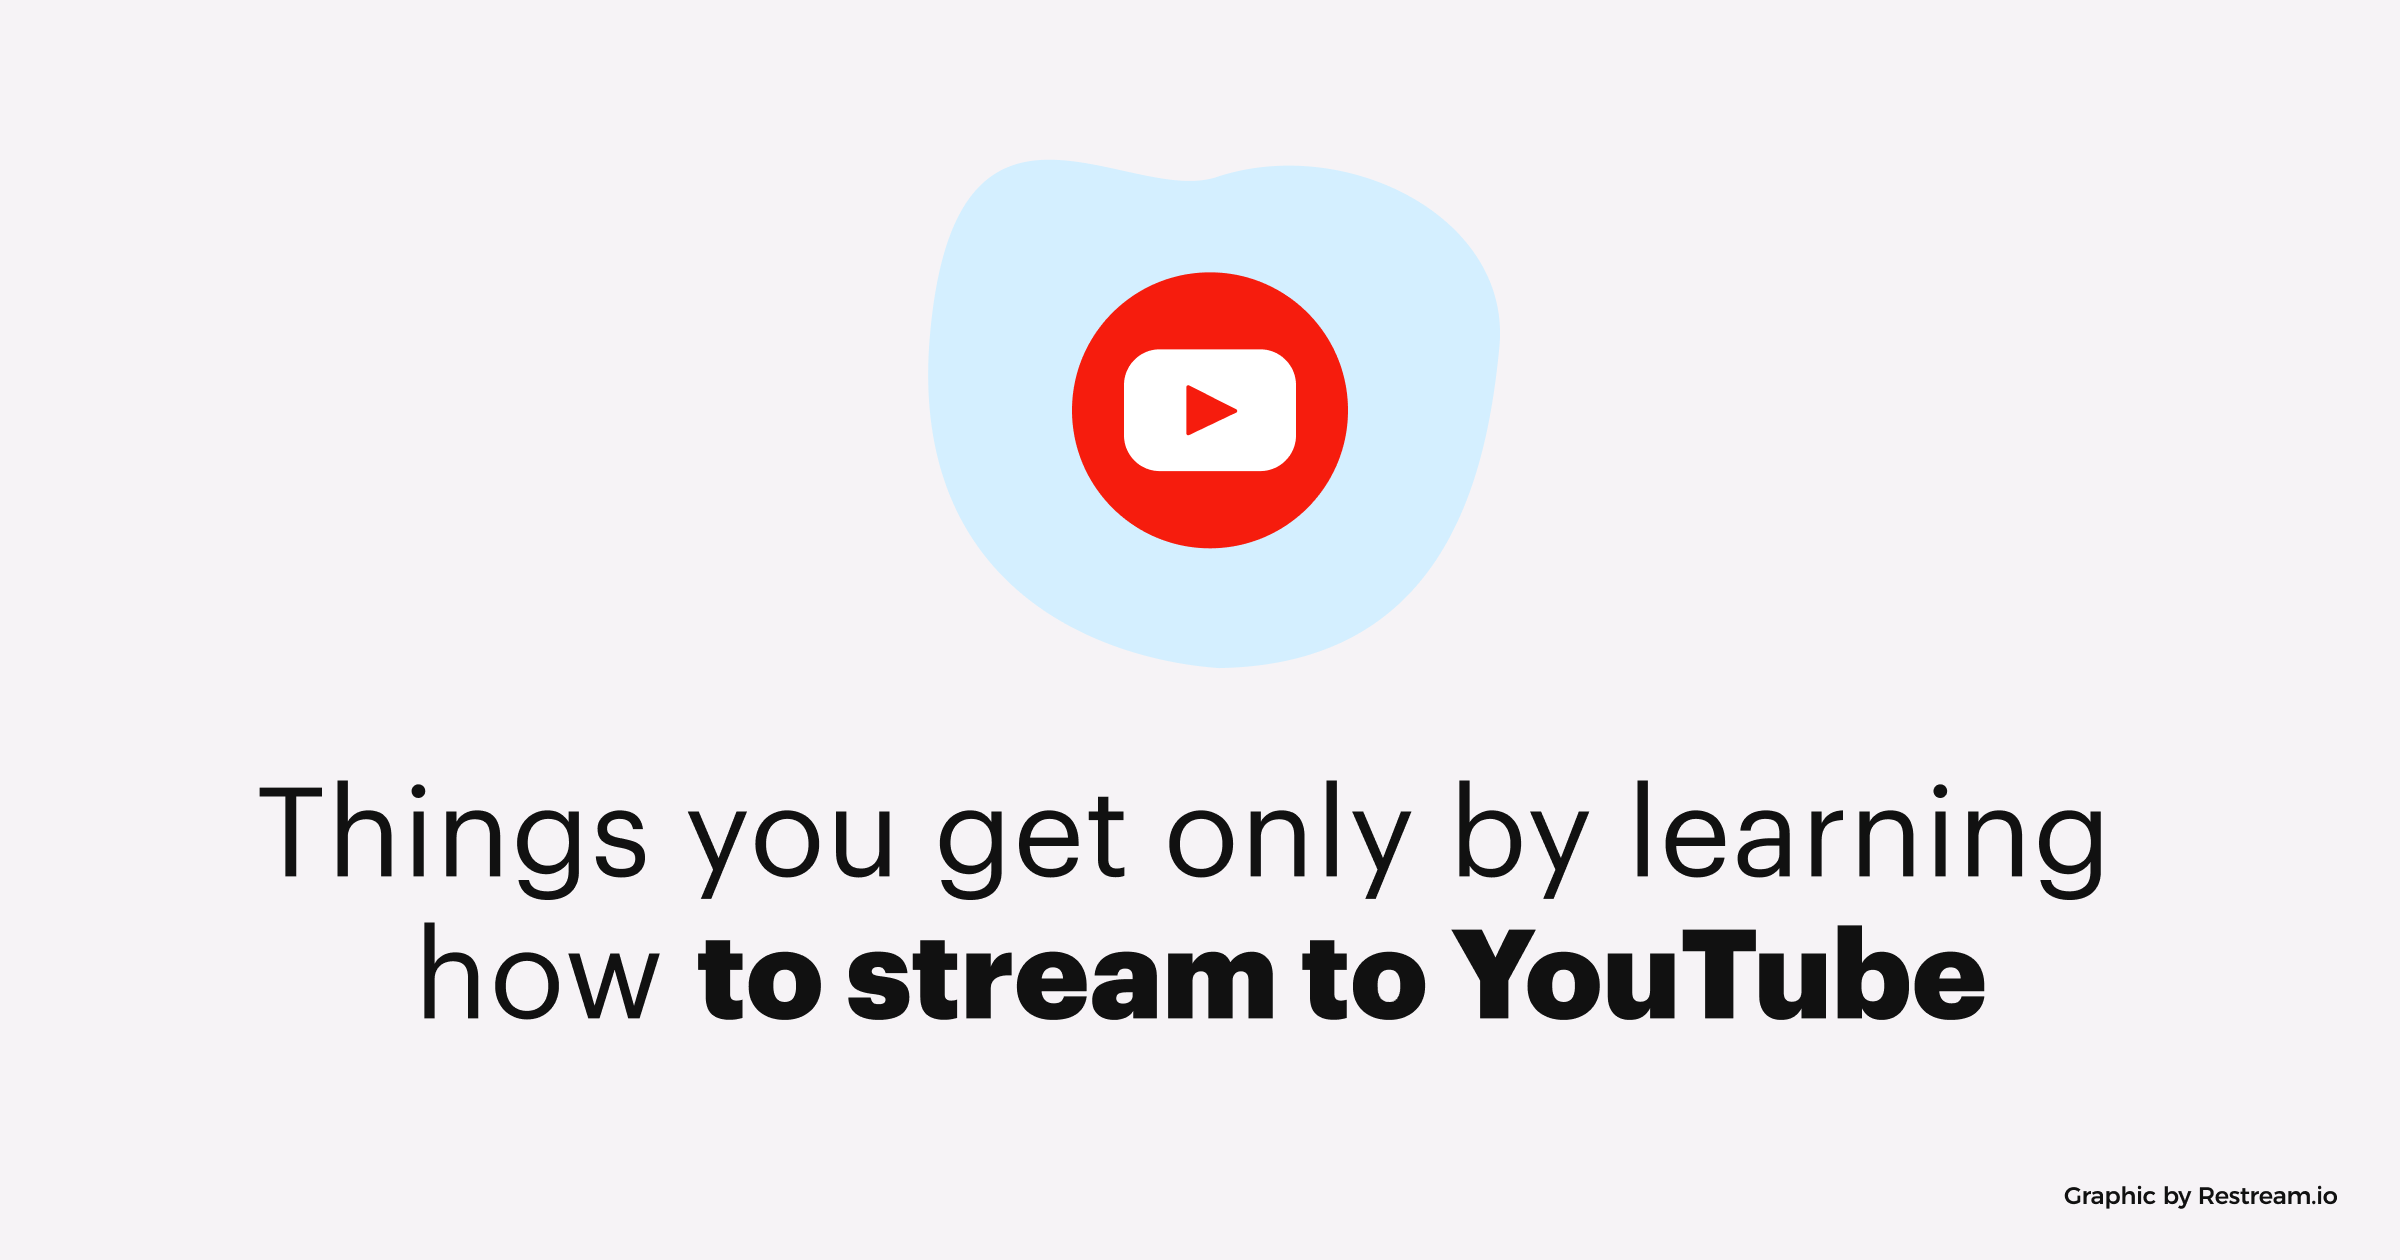 Things you get only by learning how to stream to YouTube